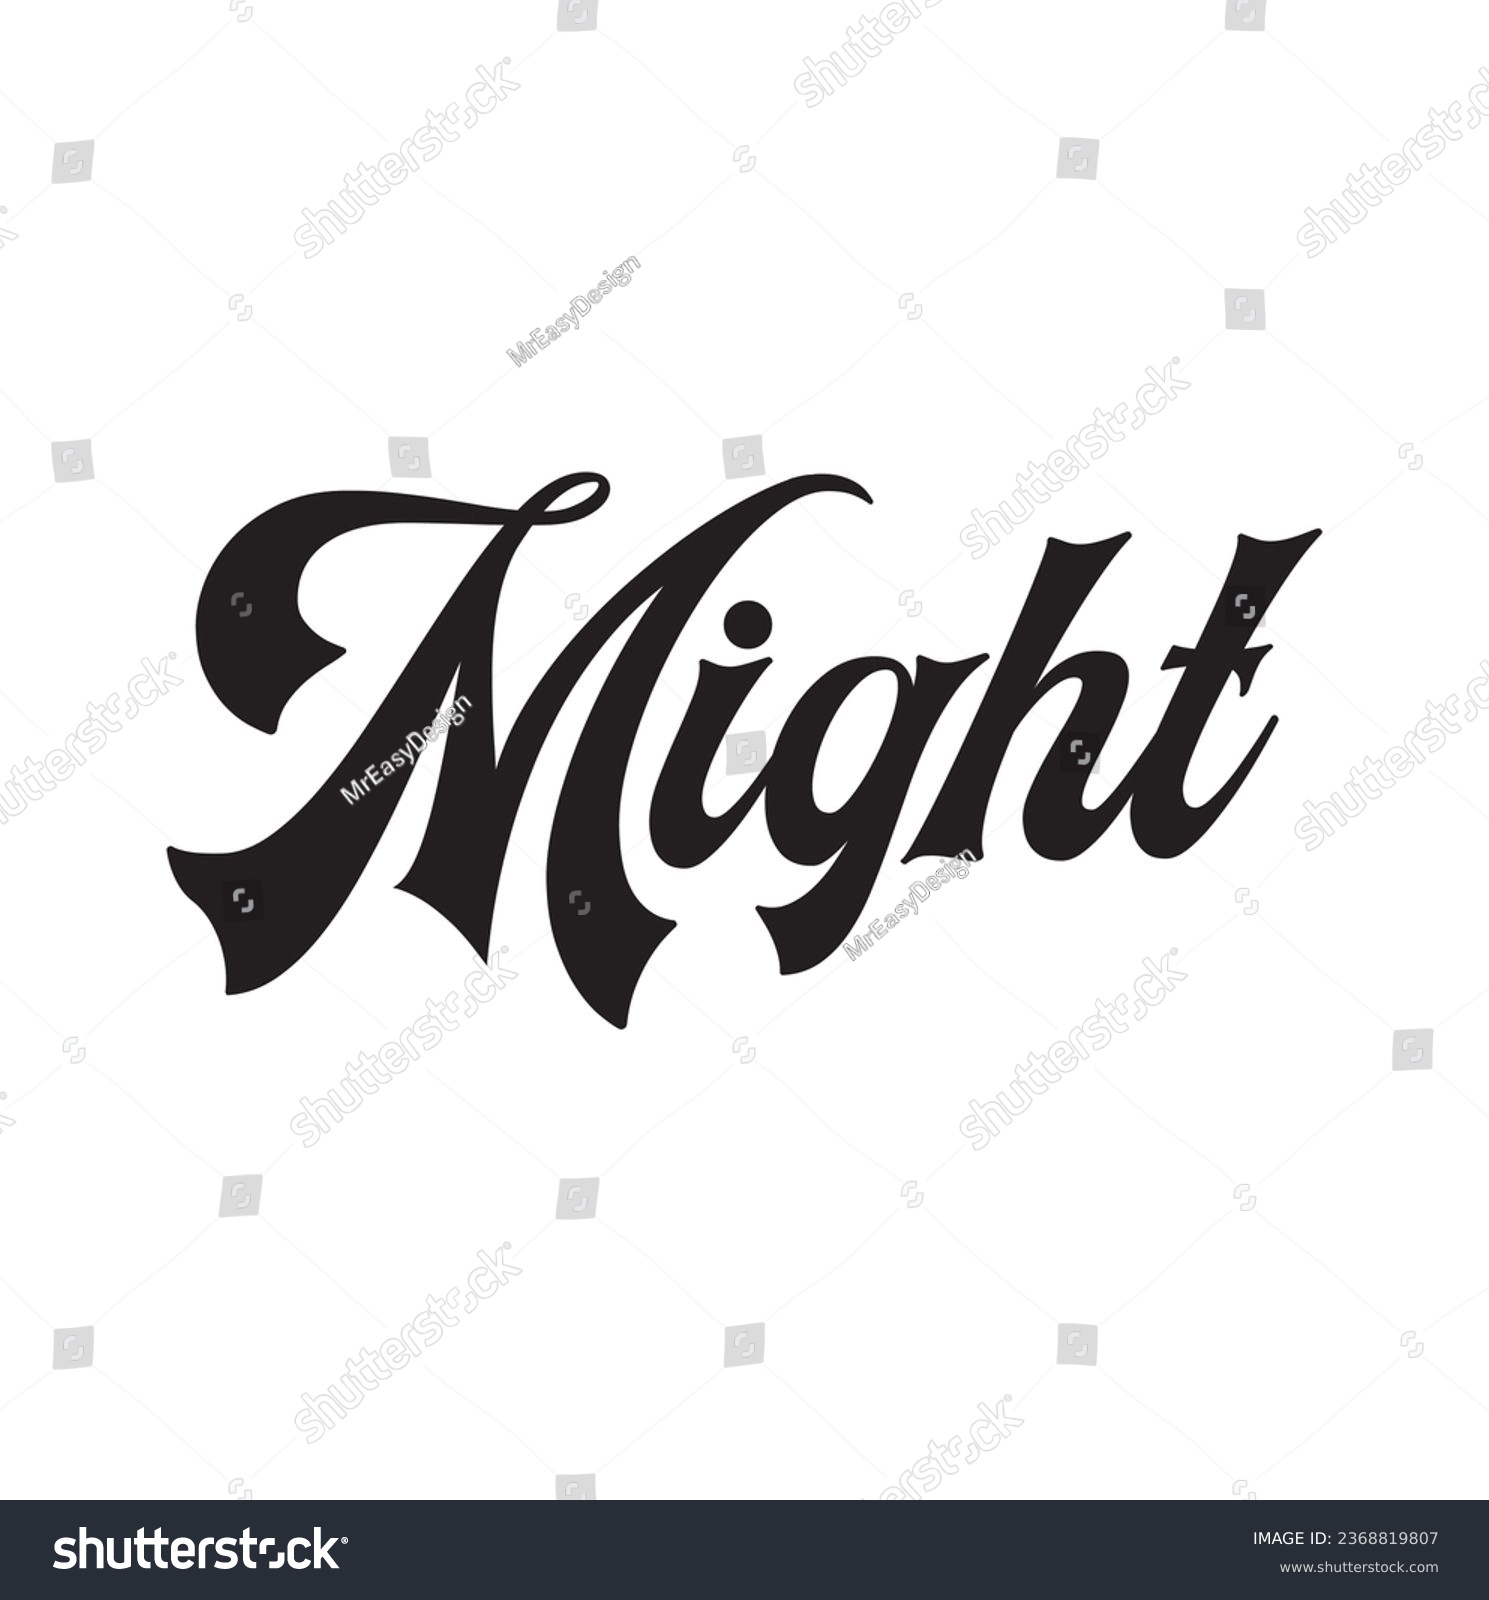 SVG of might text on white background. svg